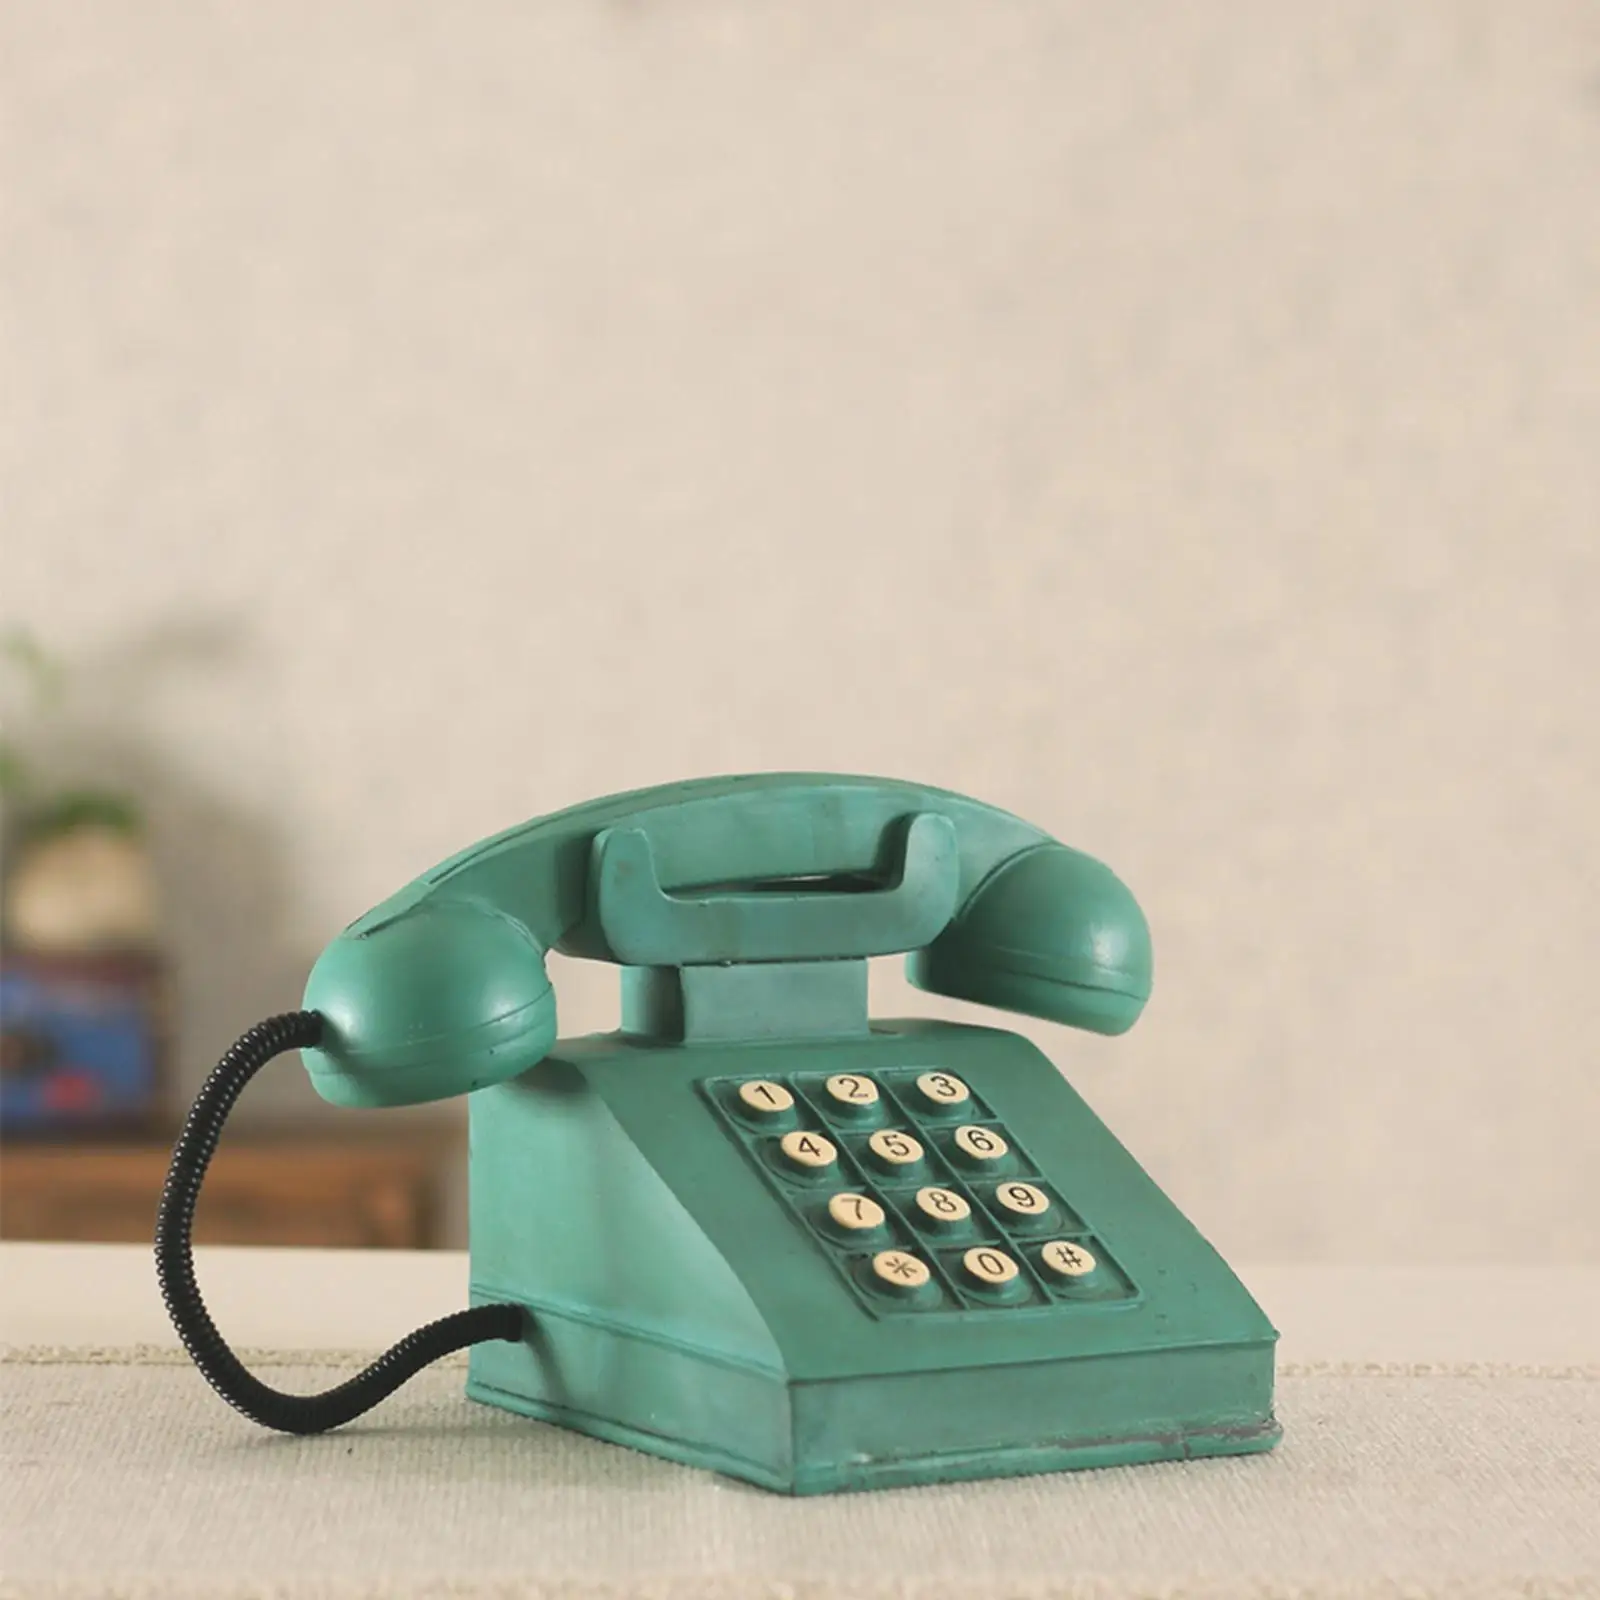 Retro Style American Telephone Model Statue Resin Craft for Office